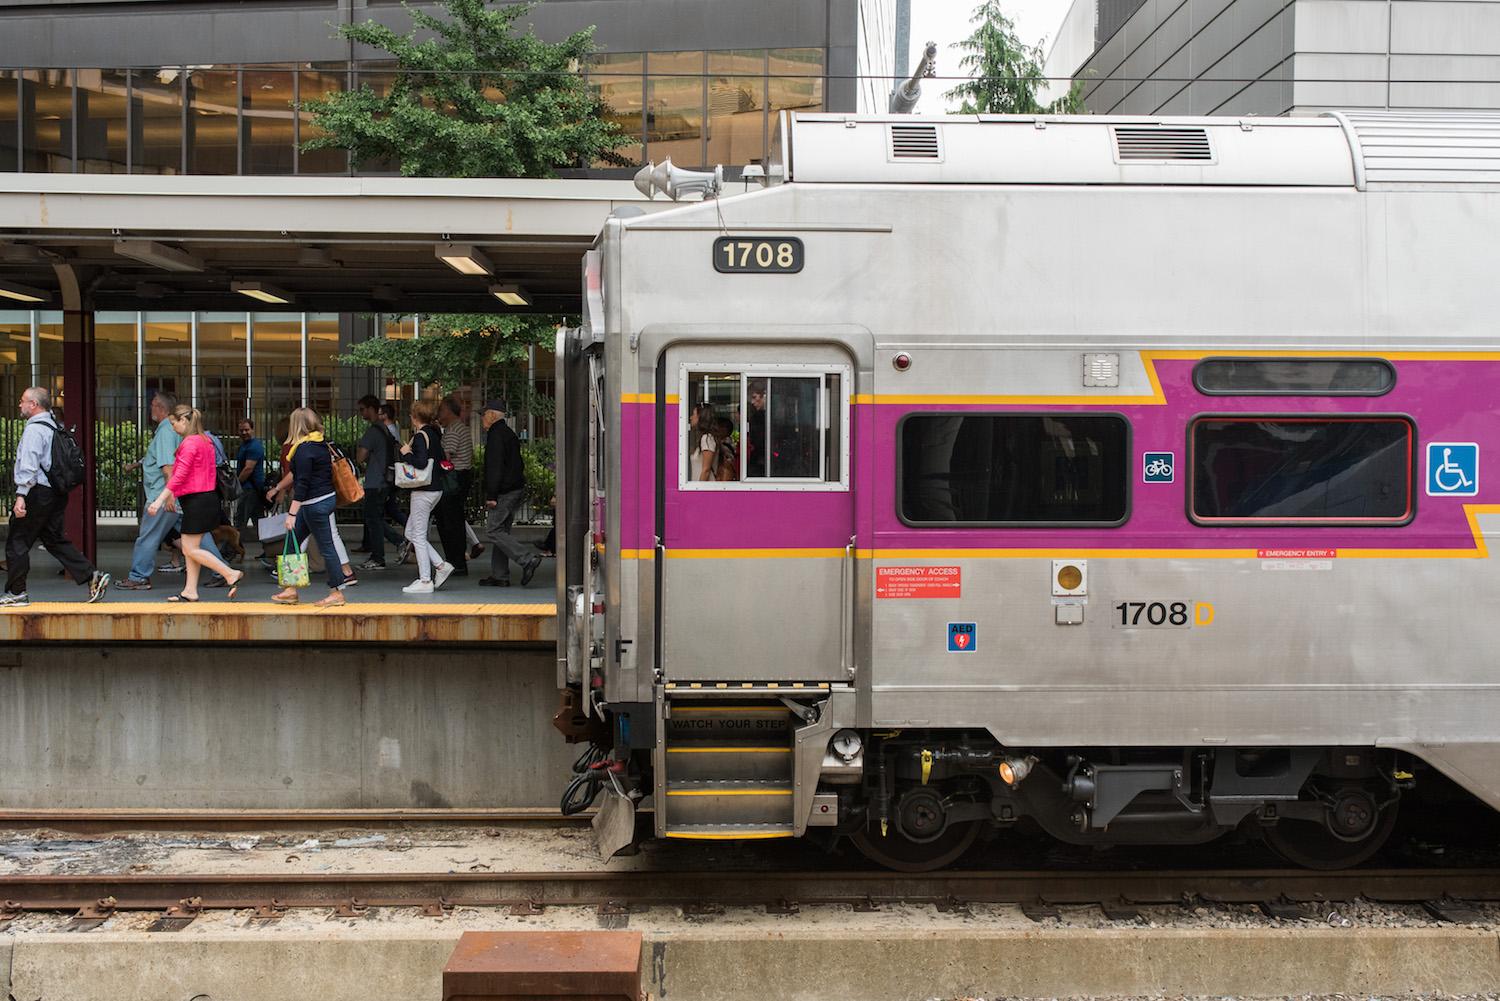 Commuter Rail train at South Station, with passengers disembarking